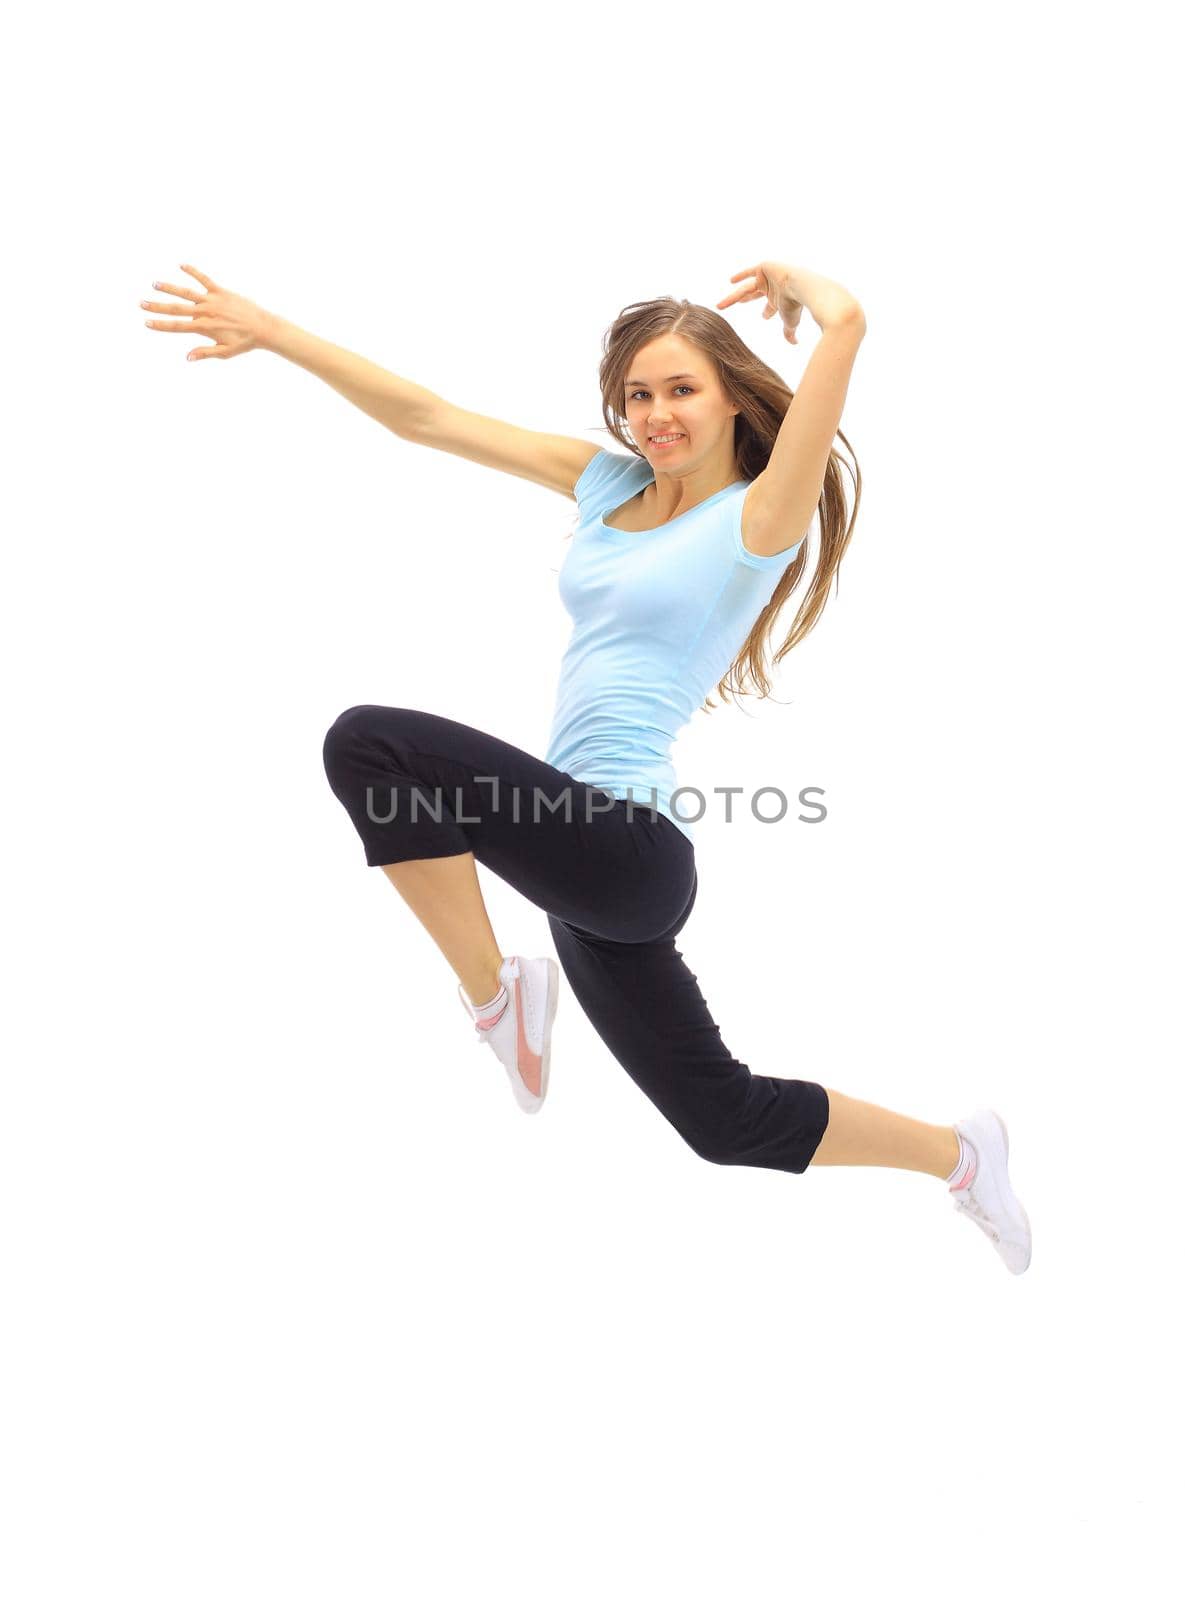 The beautiful young woman plays sports on a white background